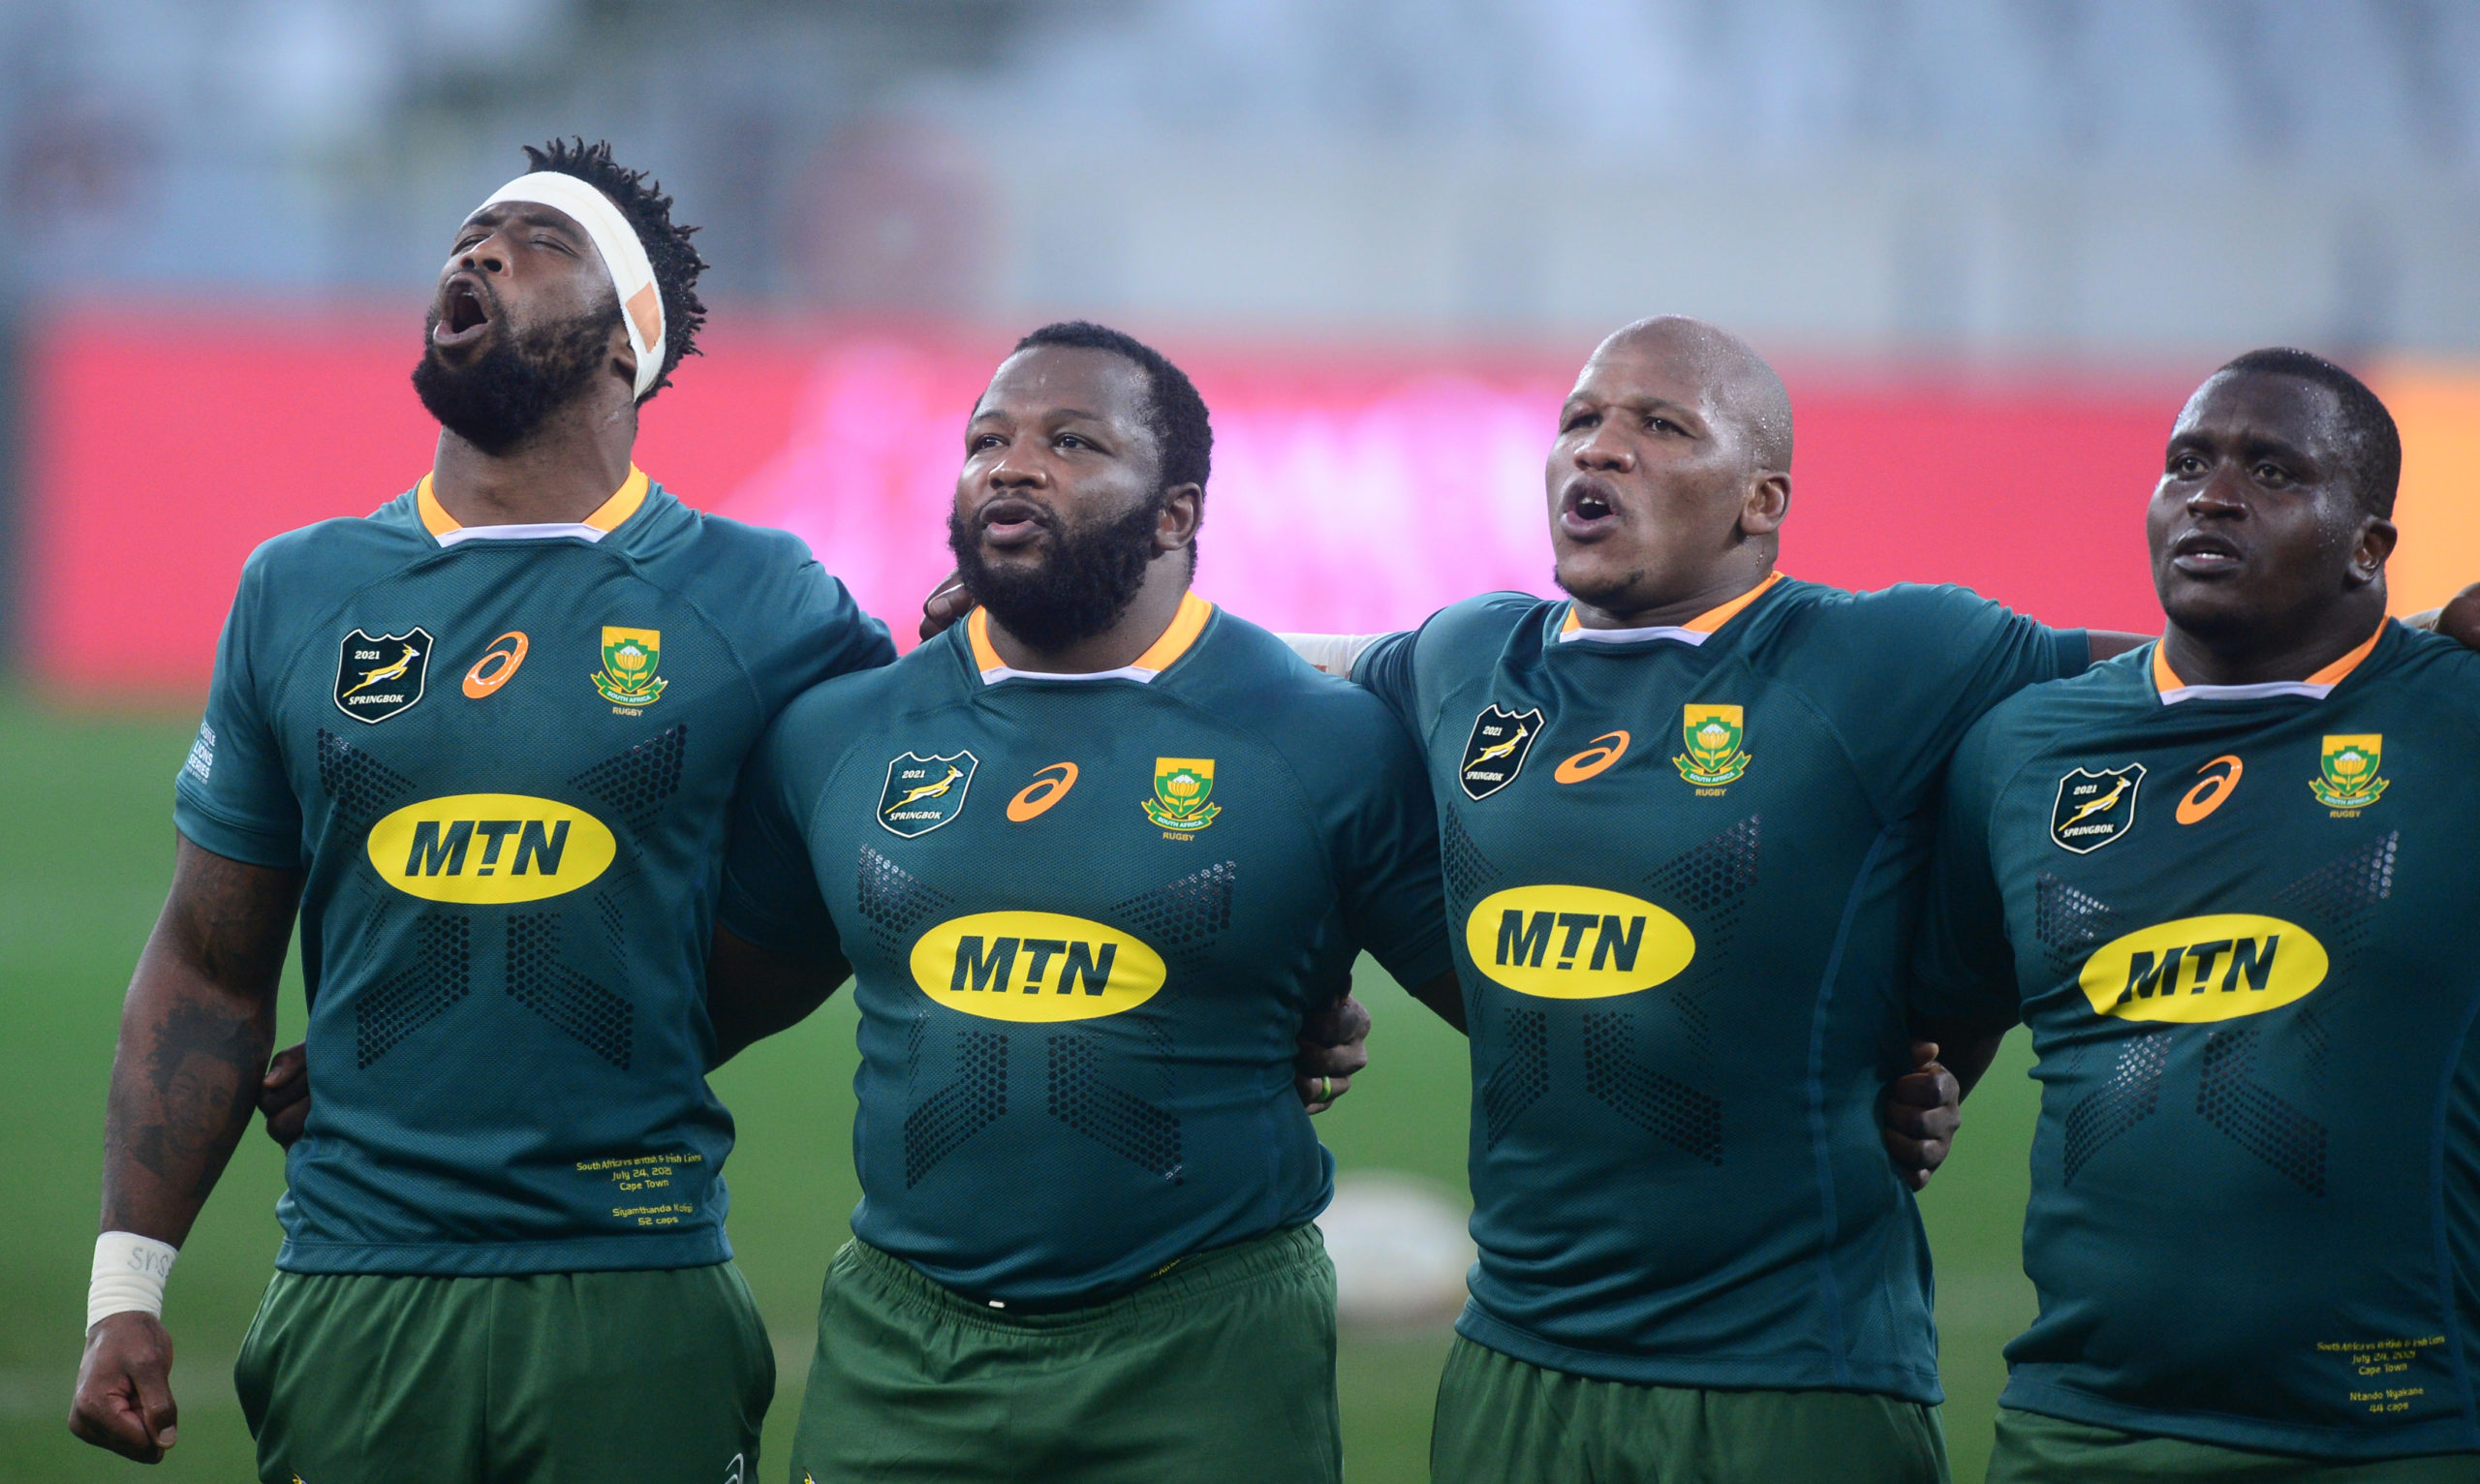 The Boks sing the national anthem